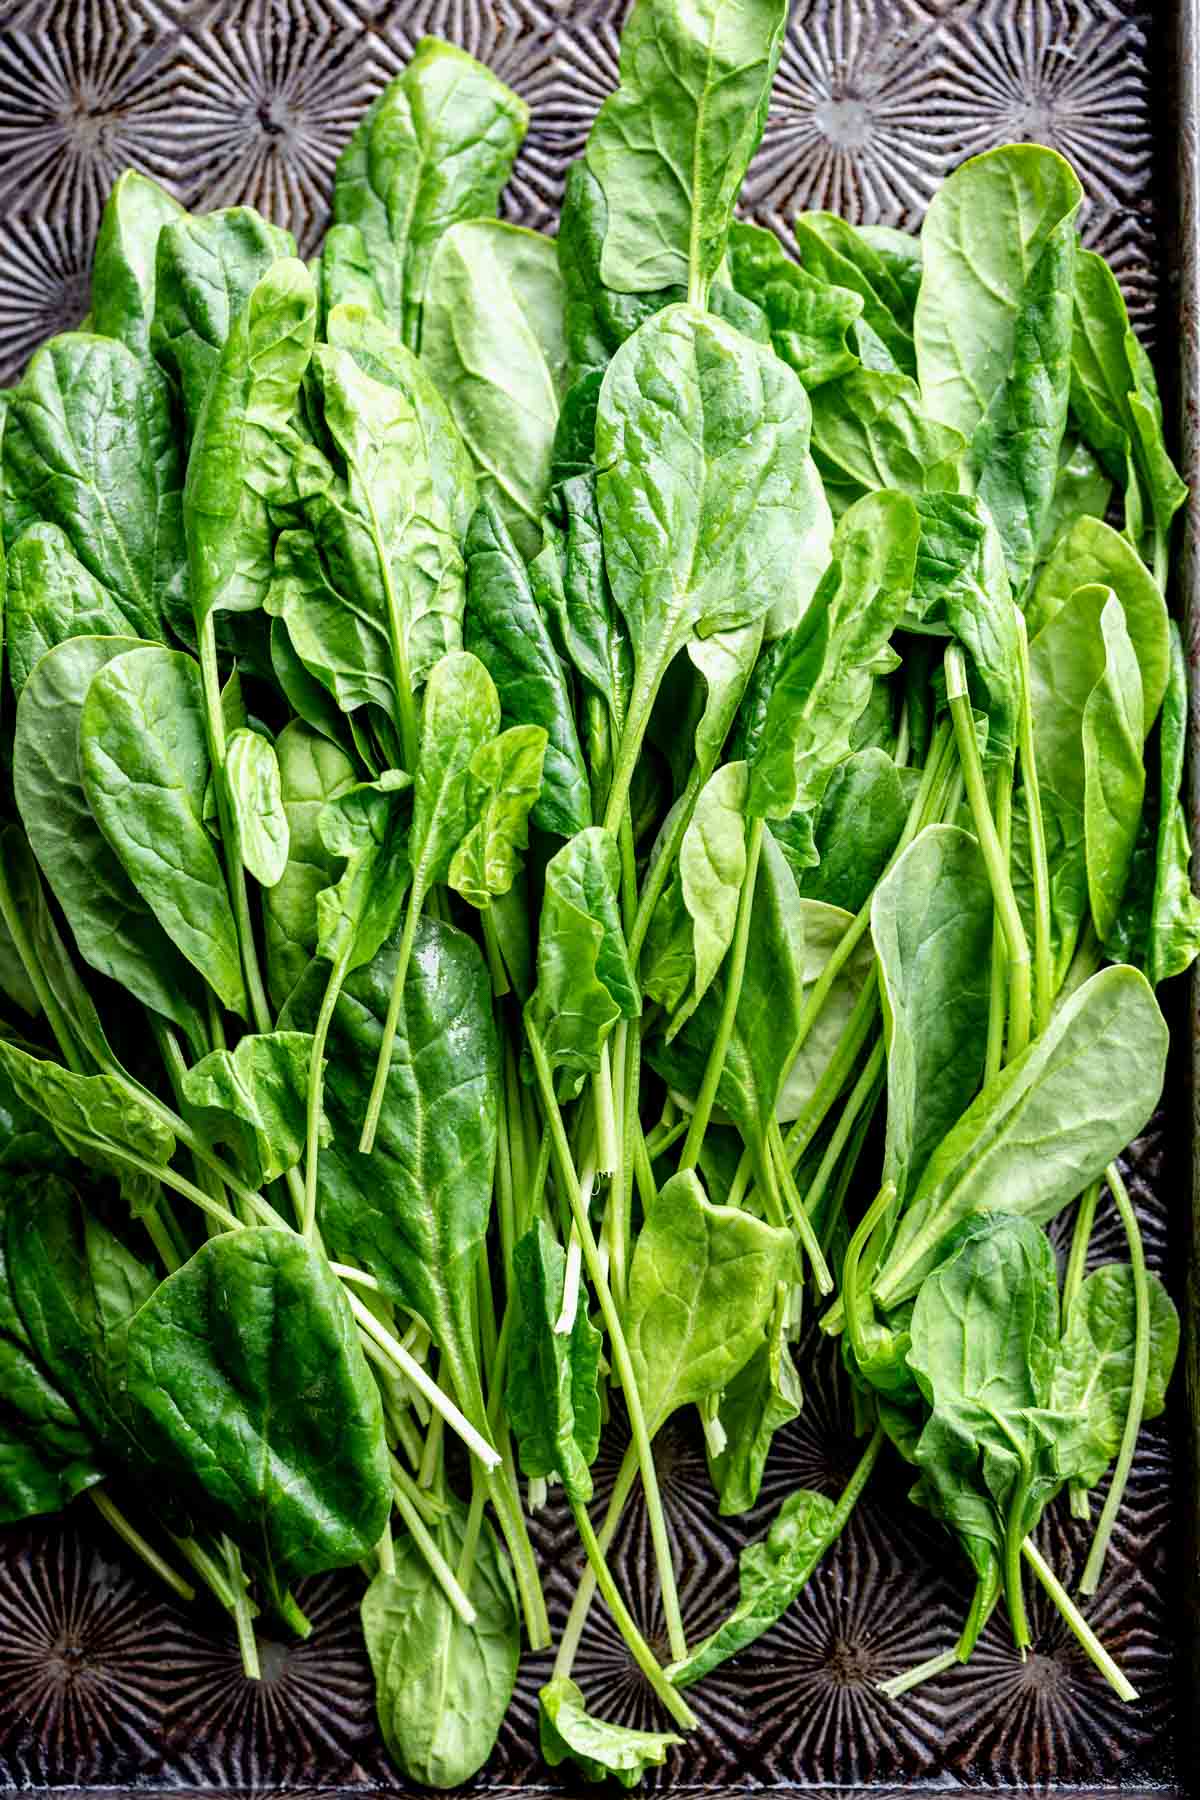 A bunch of spinach leaves on a dark table.